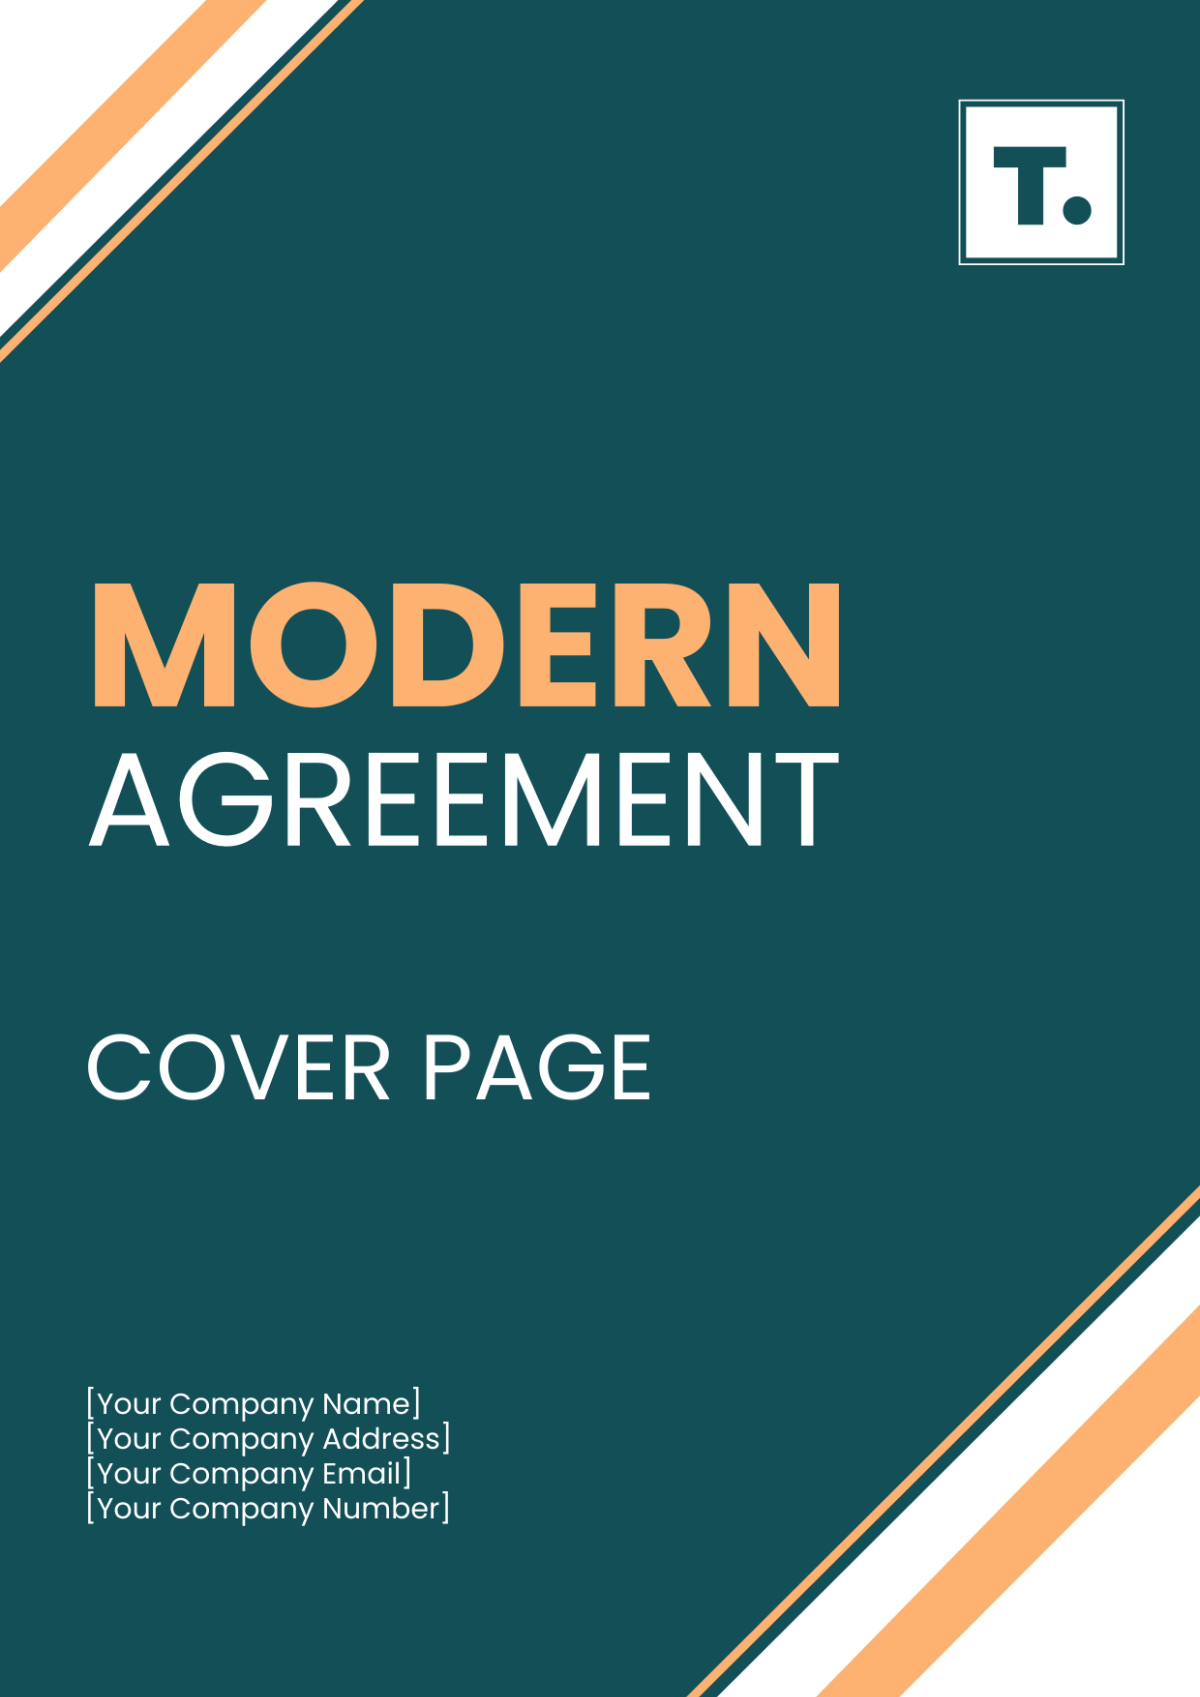 Modern Agreement Cover Page